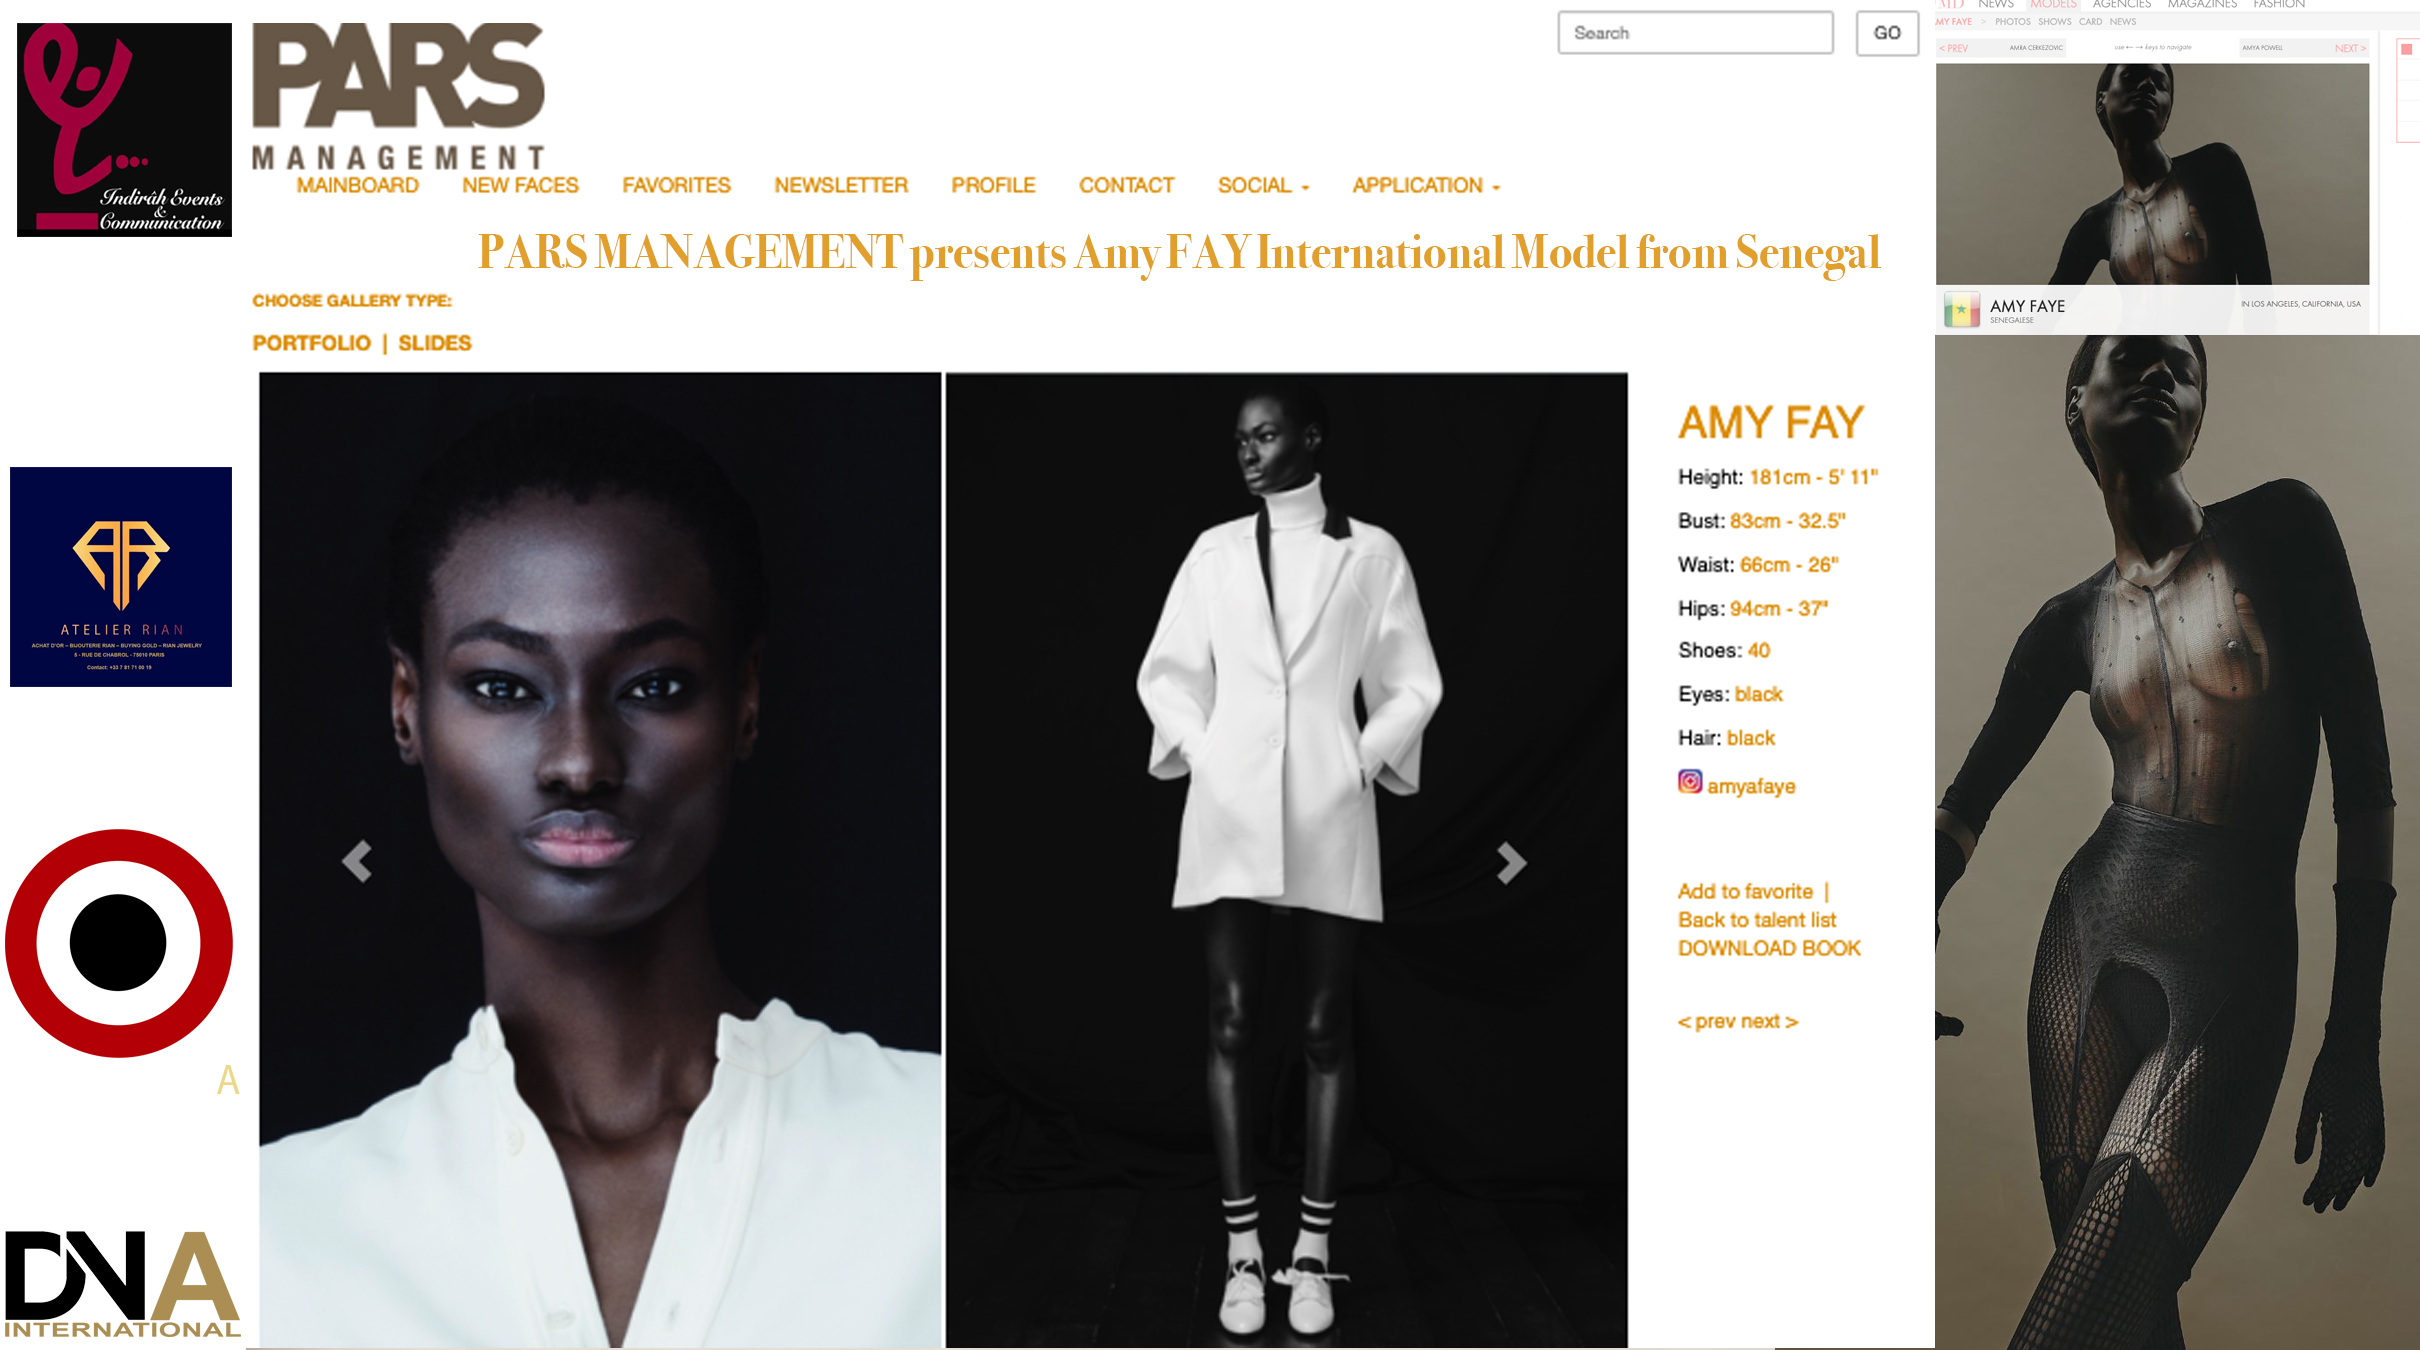 AFRICA-VOGUE-COVER-PARS-MANAGEMENT-presents-Amy-FAY-International-Model-from-Senegal-DN-AFRICA-Media-Partner